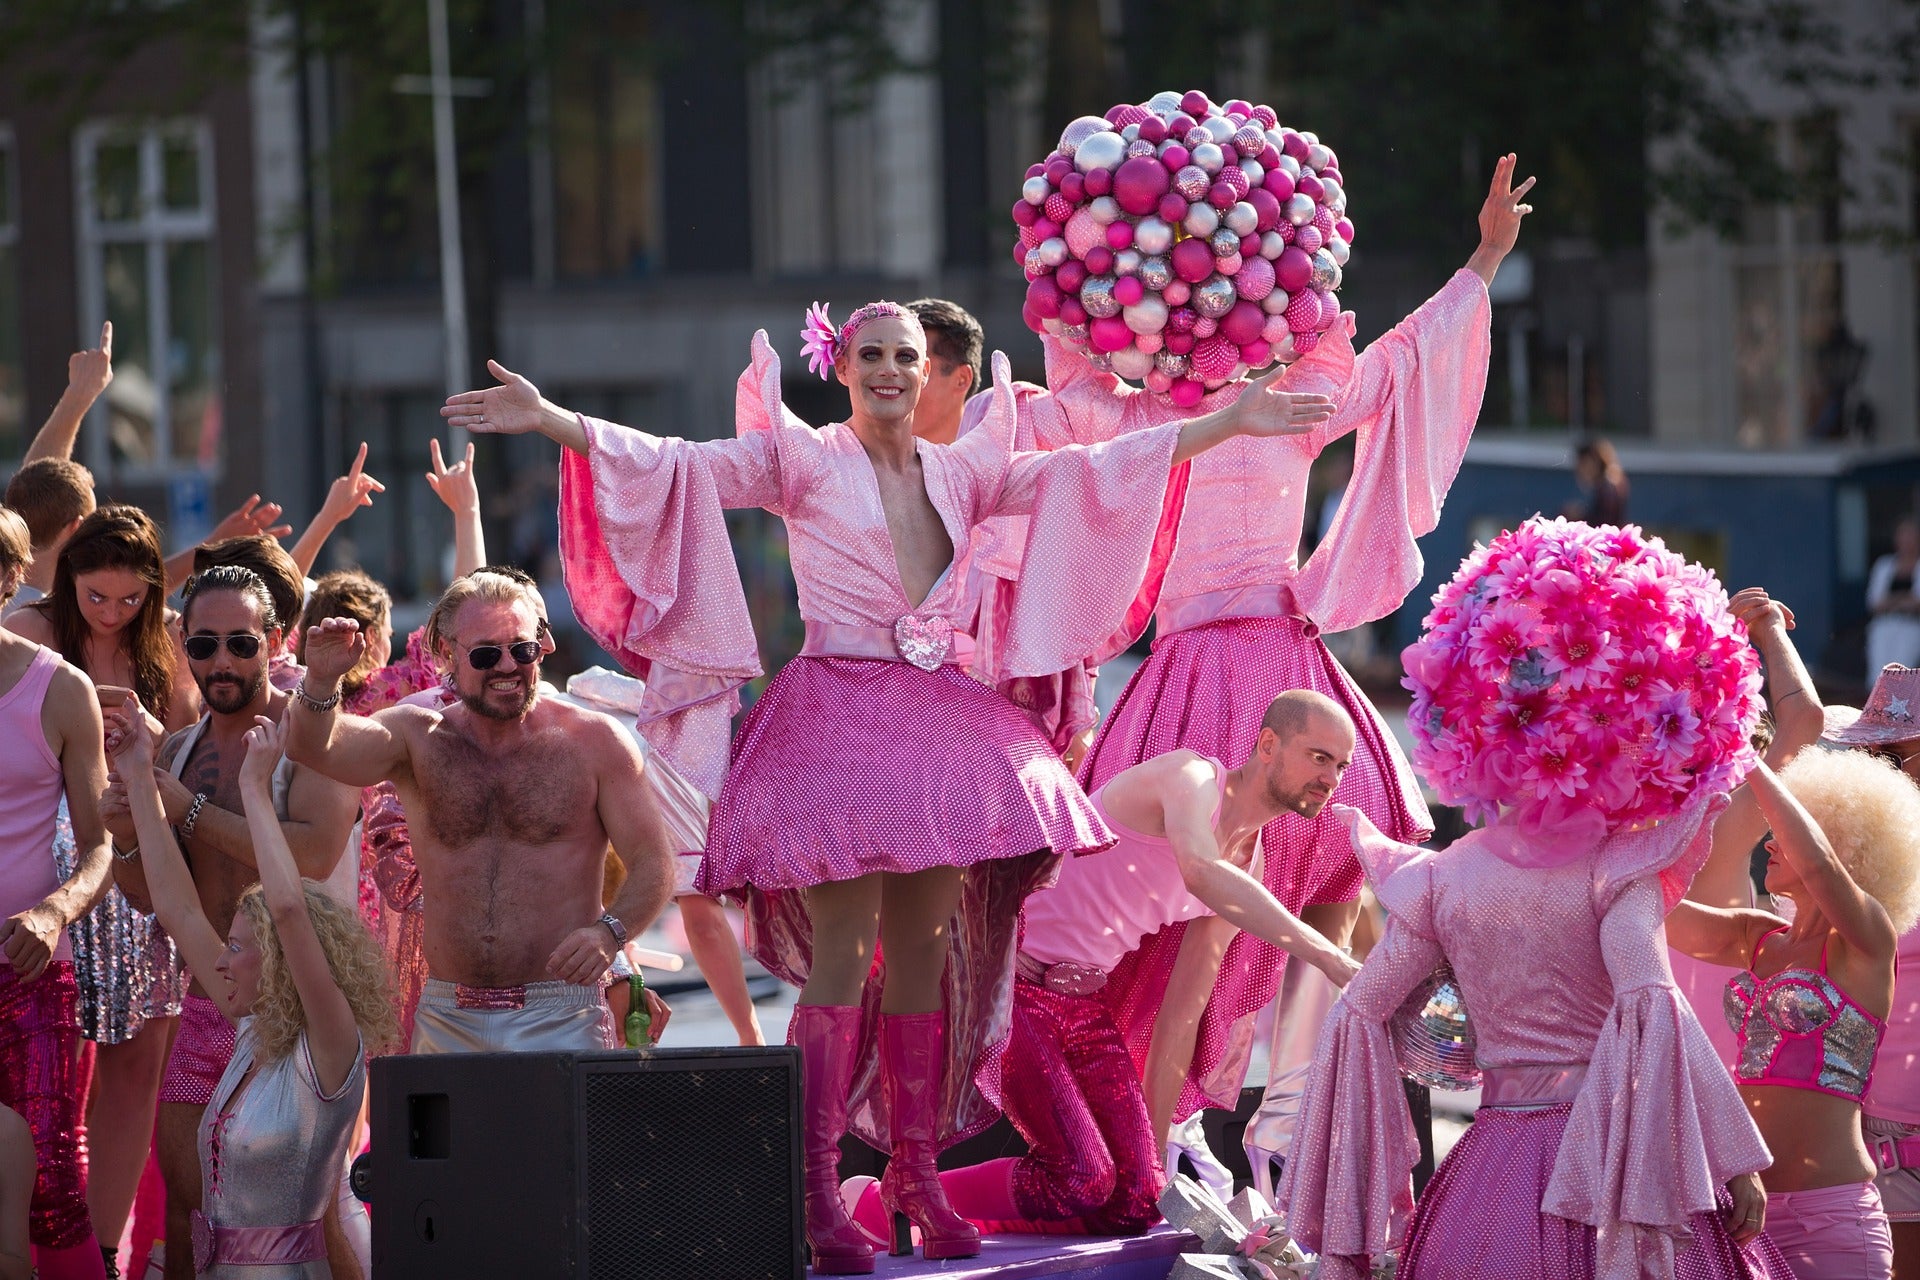 14 Tips for Dressing Your Best at Pride: A Guide to Celebrating in Style